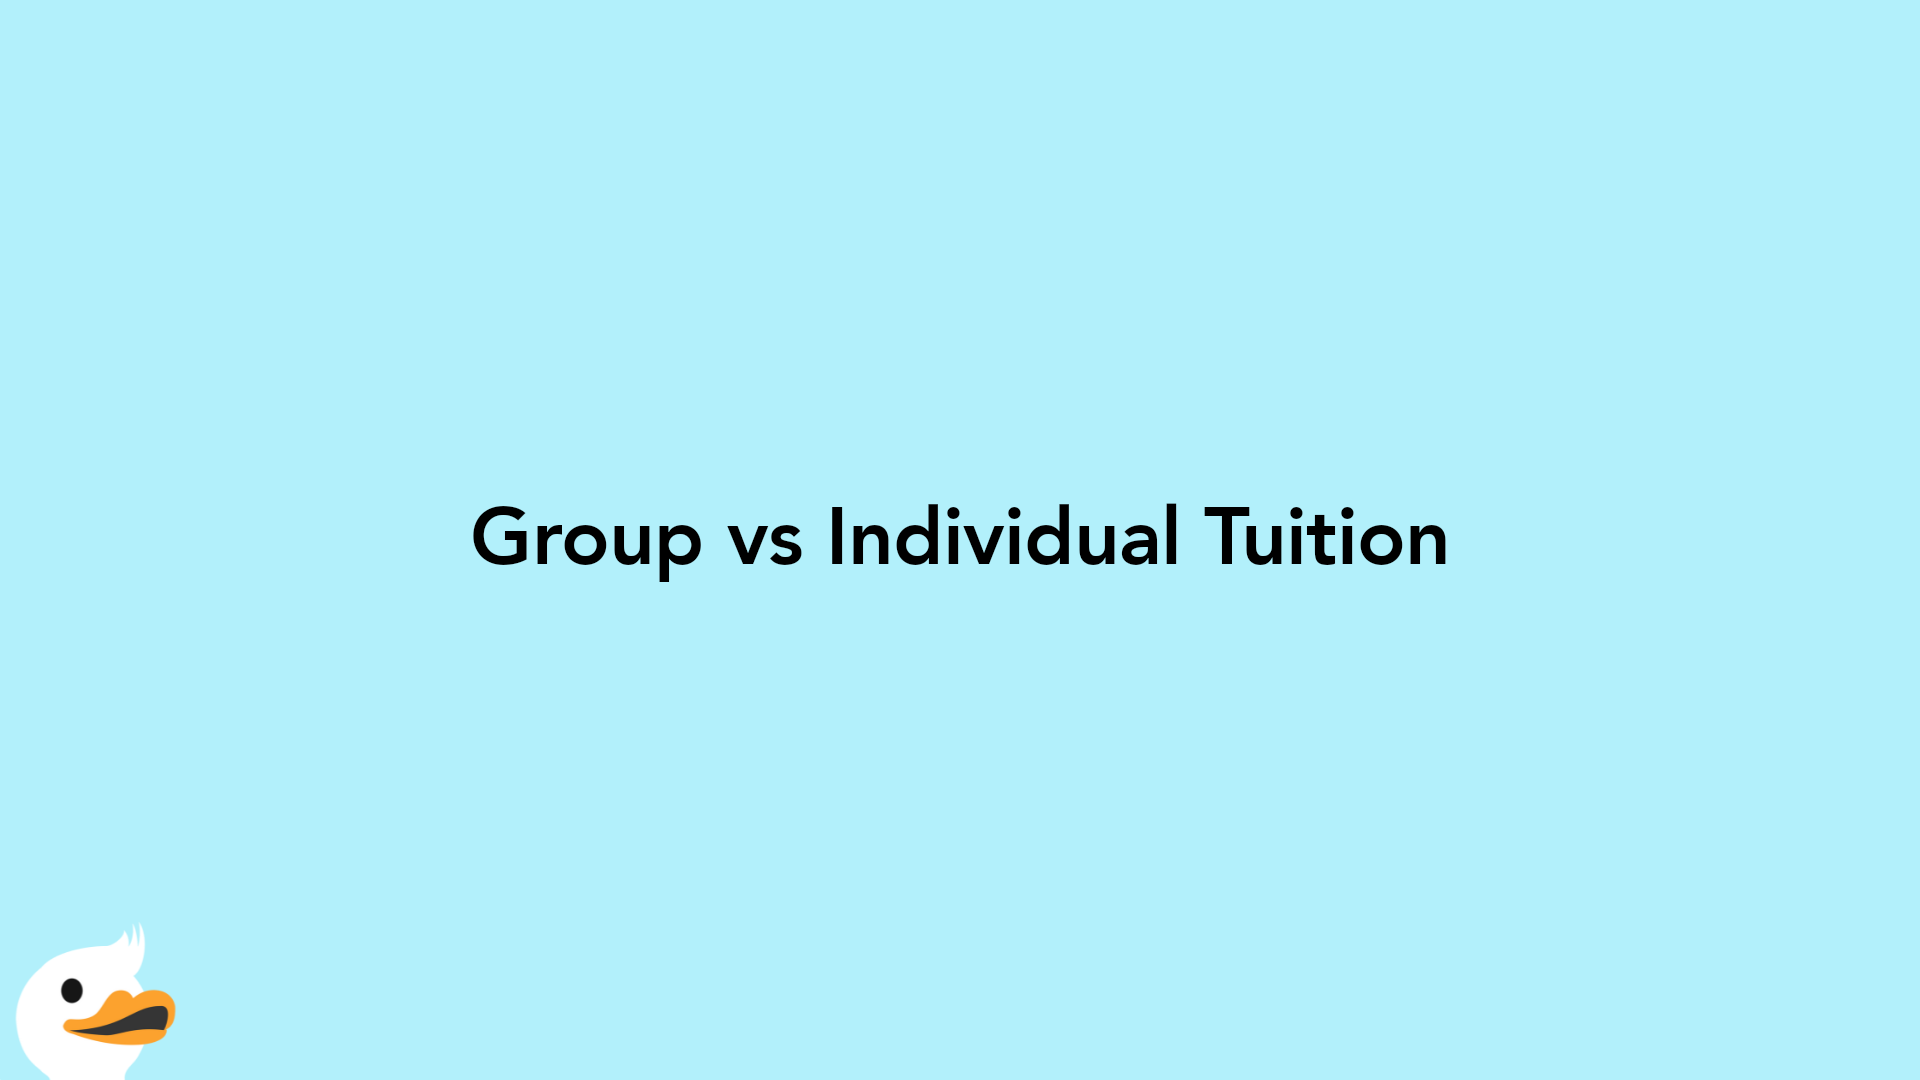 Group vs Individual Tuition